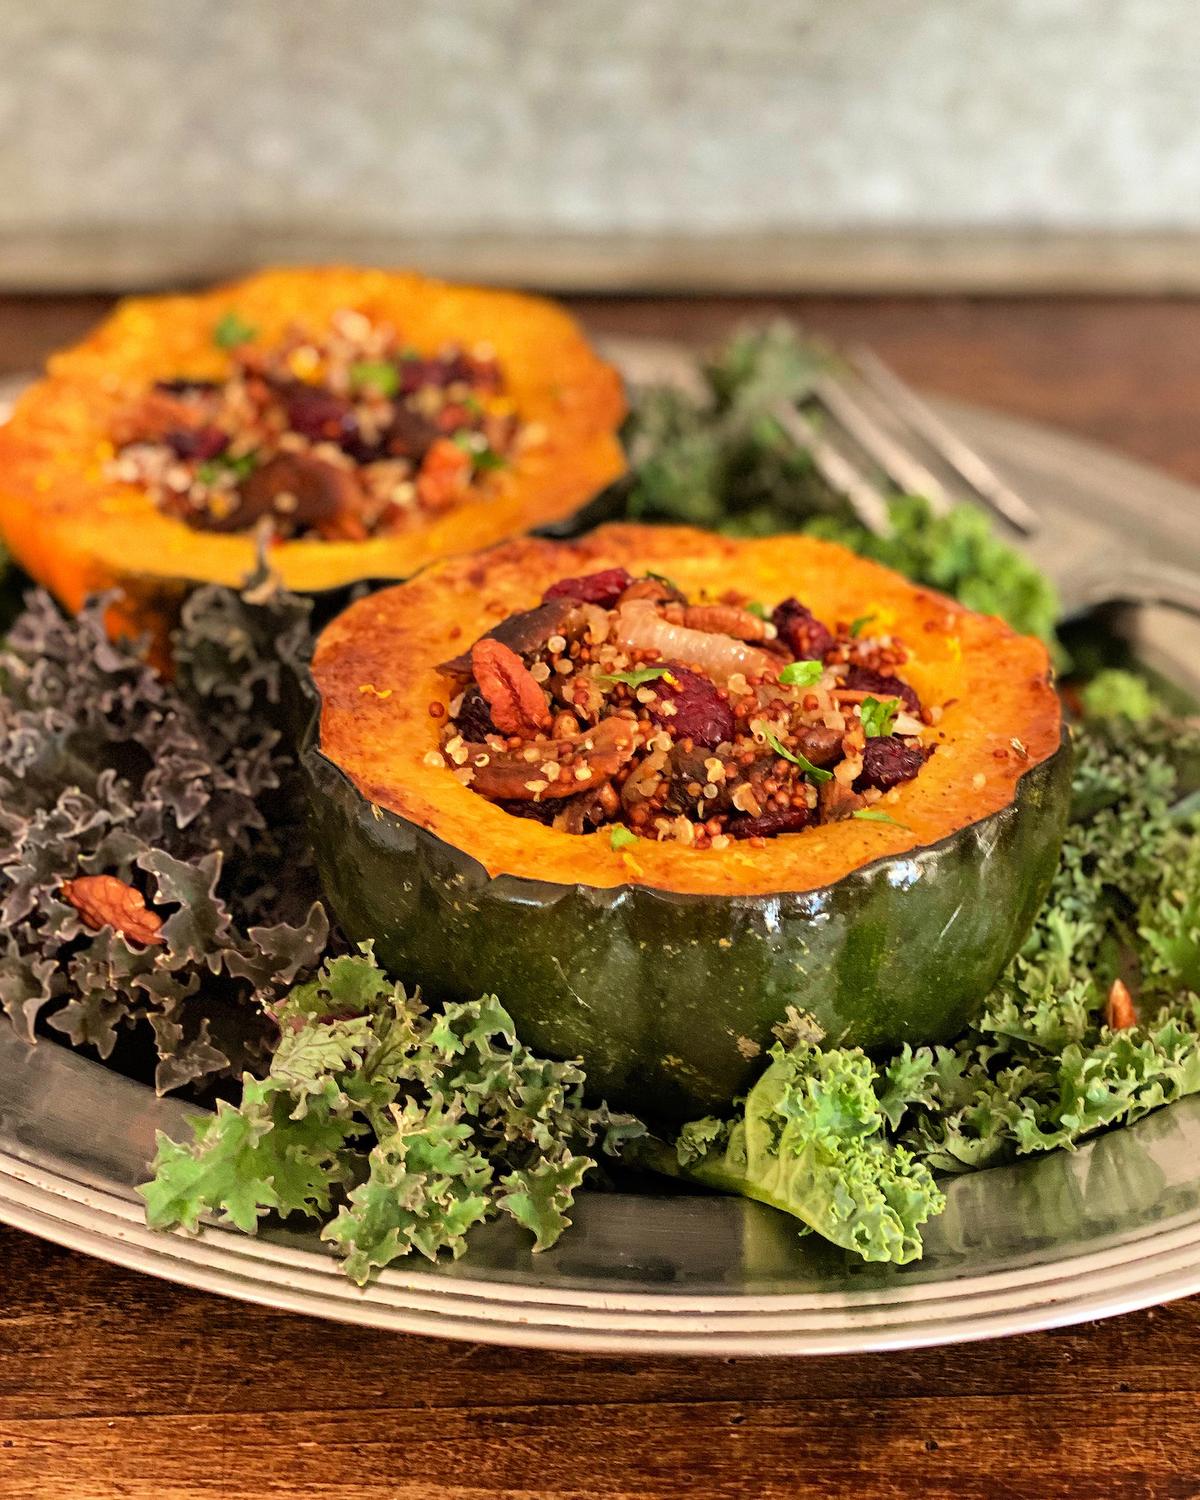 The squash can be roasted and stuffed in advance of serving for easy entertaining. (Lynda Balslev for Tastefood)